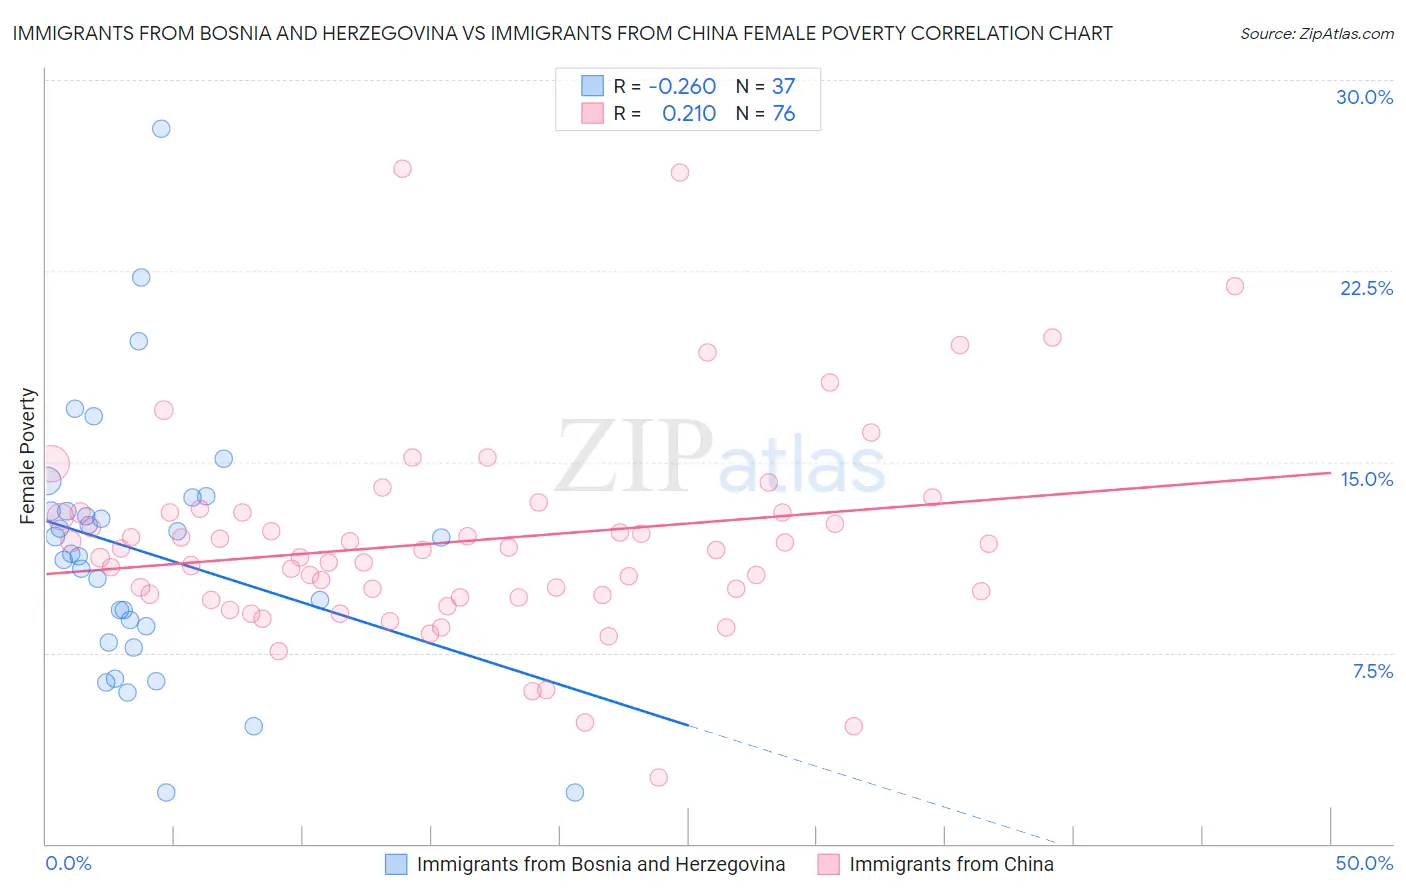 Immigrants from Bosnia and Herzegovina vs Immigrants from China Female Poverty